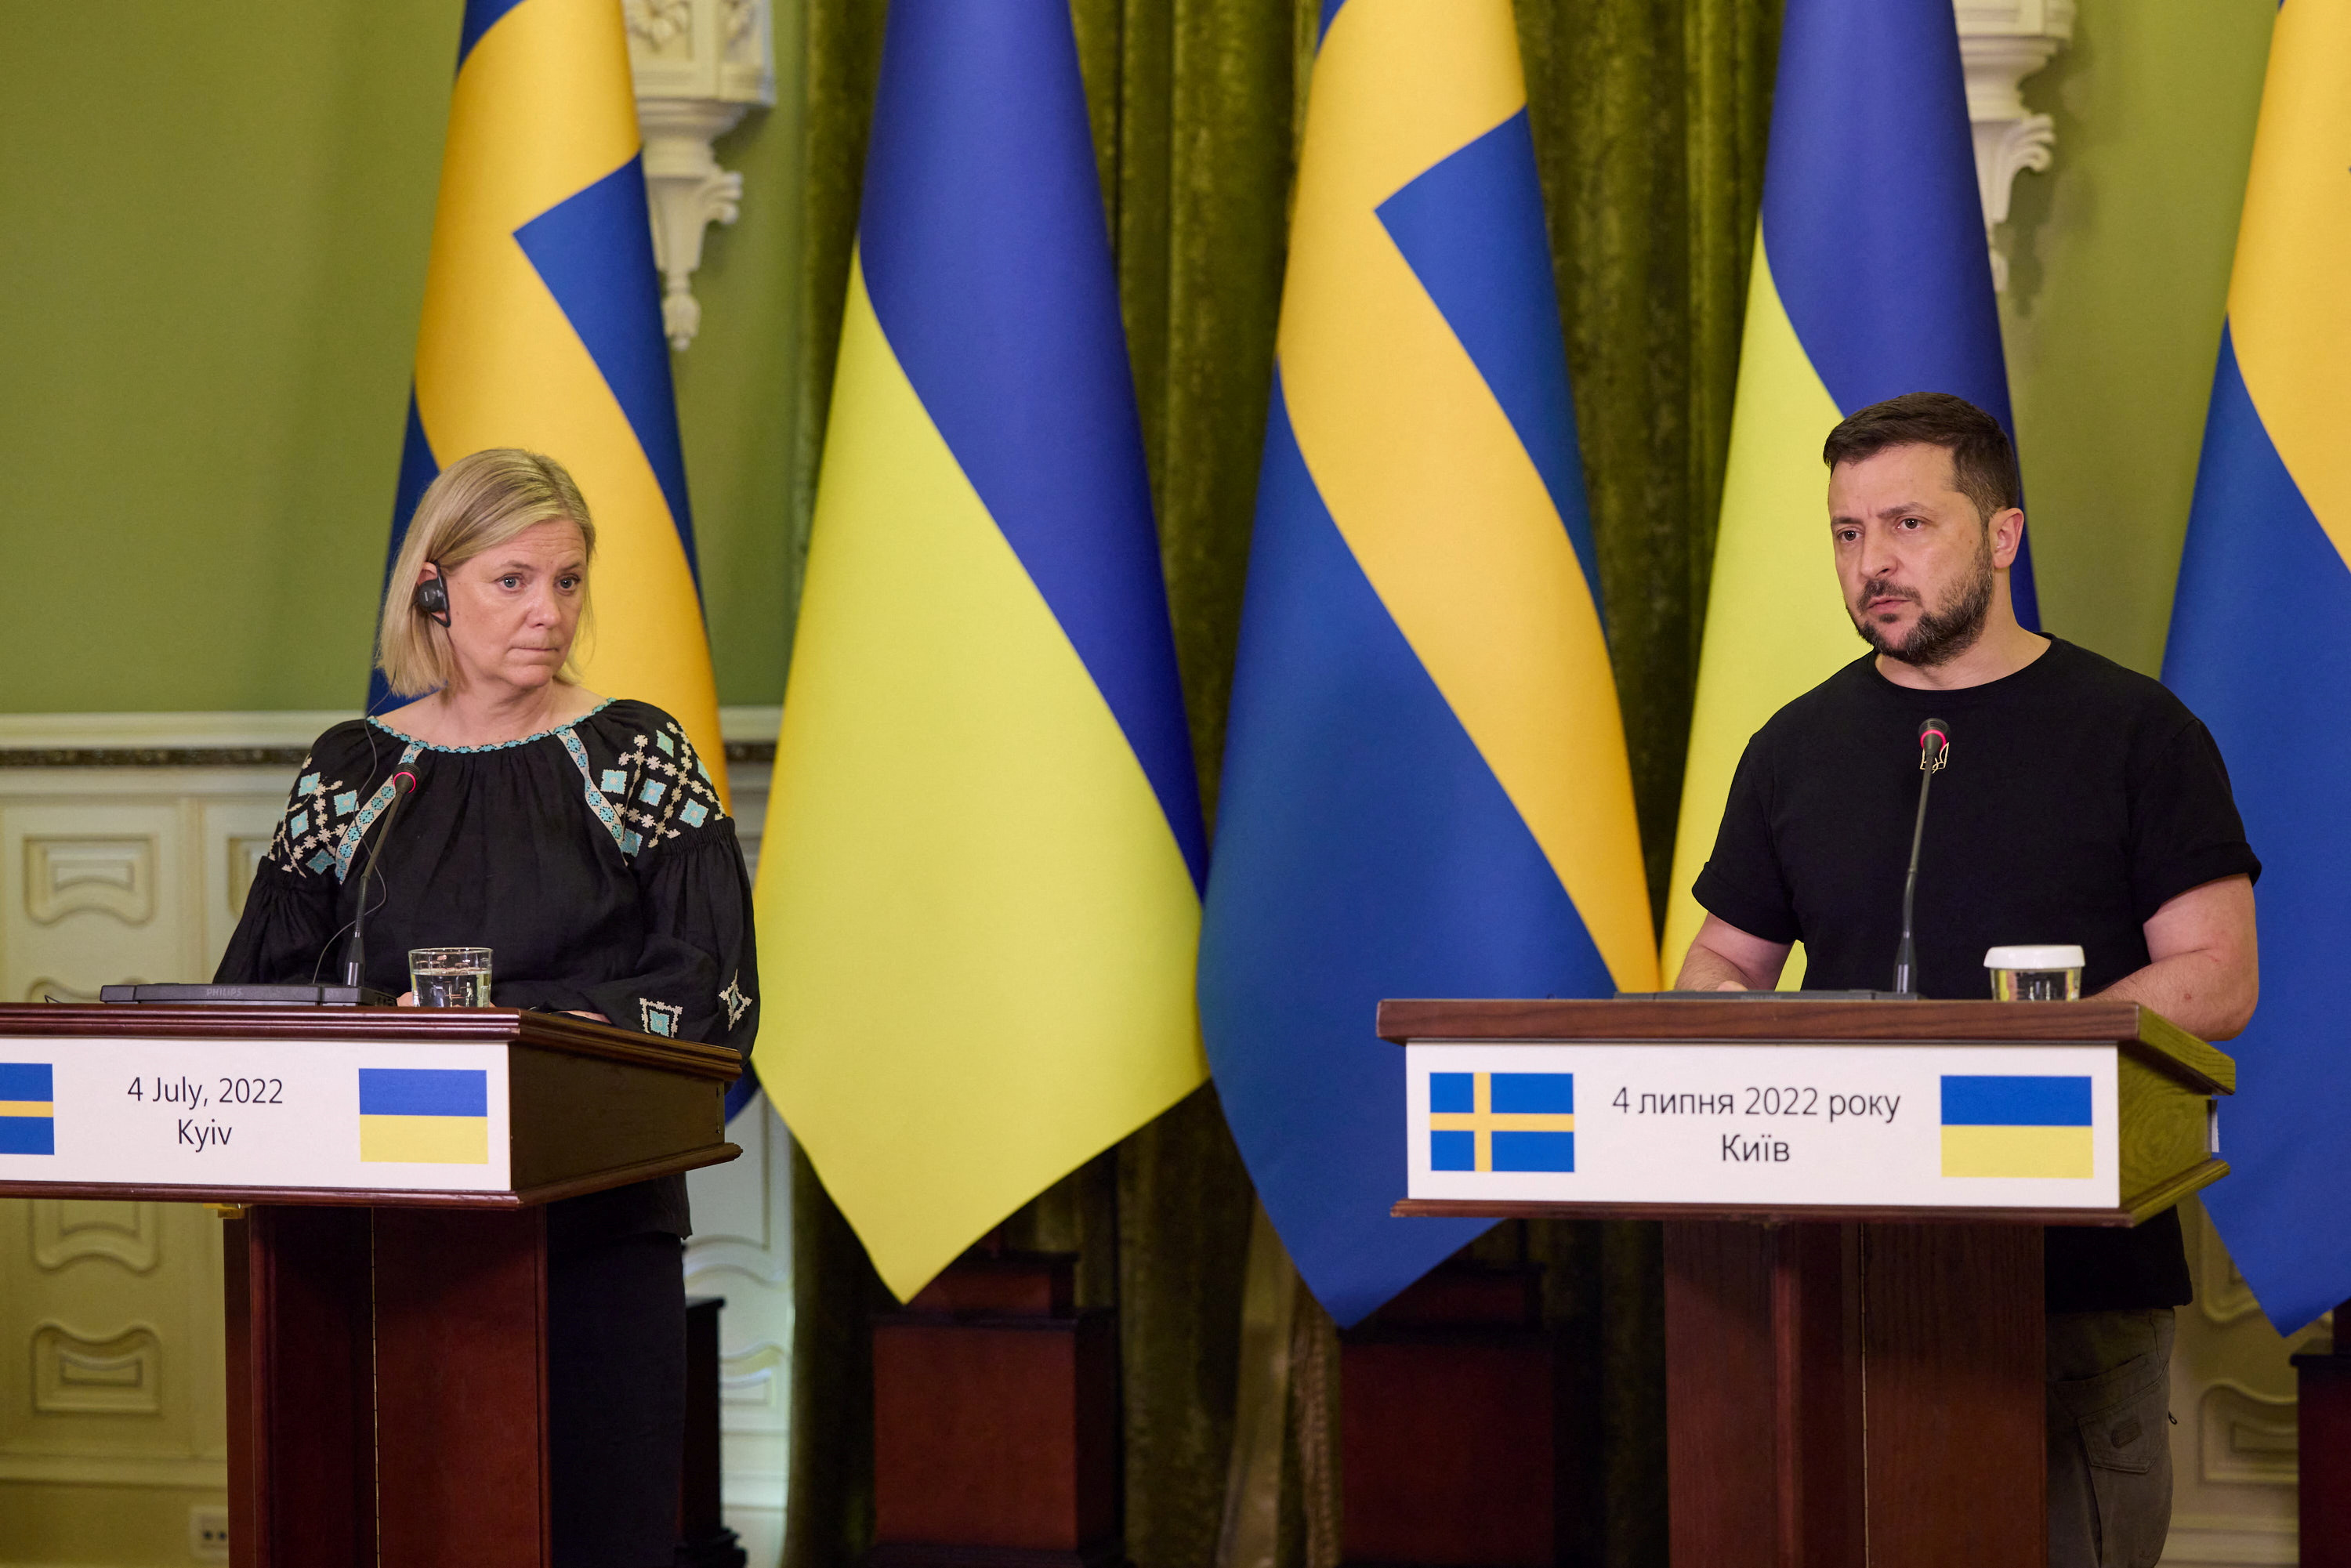 Ukraine's President Zelenskiy and Swedish Prime Minister Andersson attend a joint news briefing in Kyiv